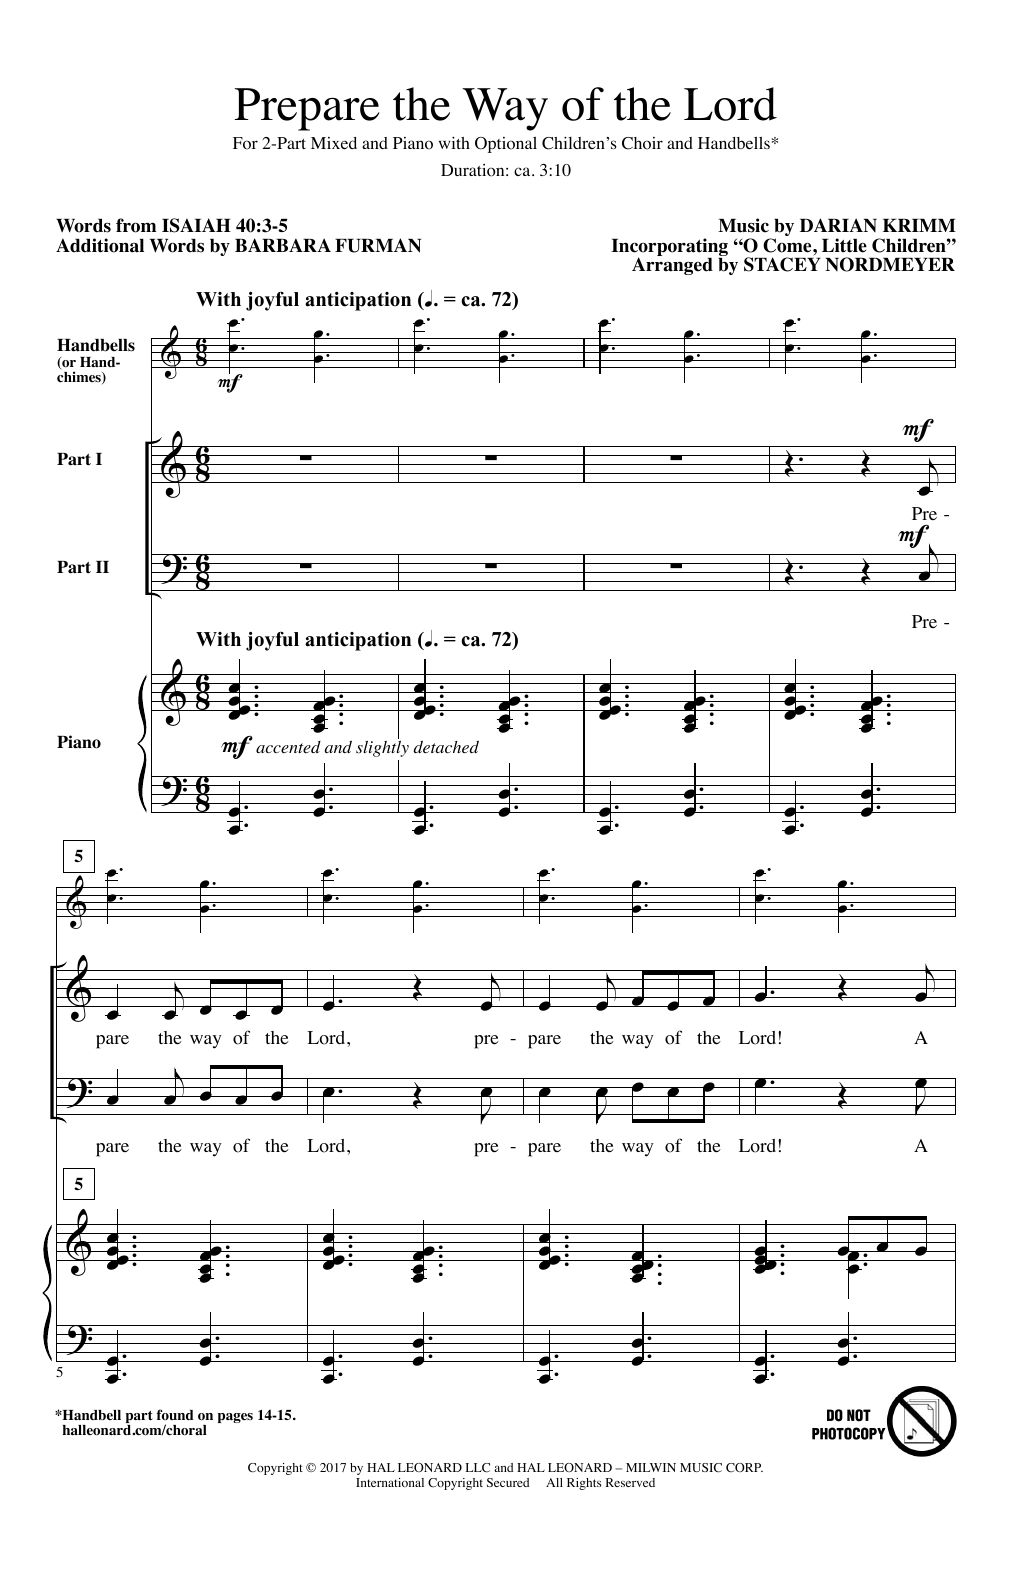 Download Darian Krimm Prepare The Way Of The Lord (arr. Stace Sheet Music